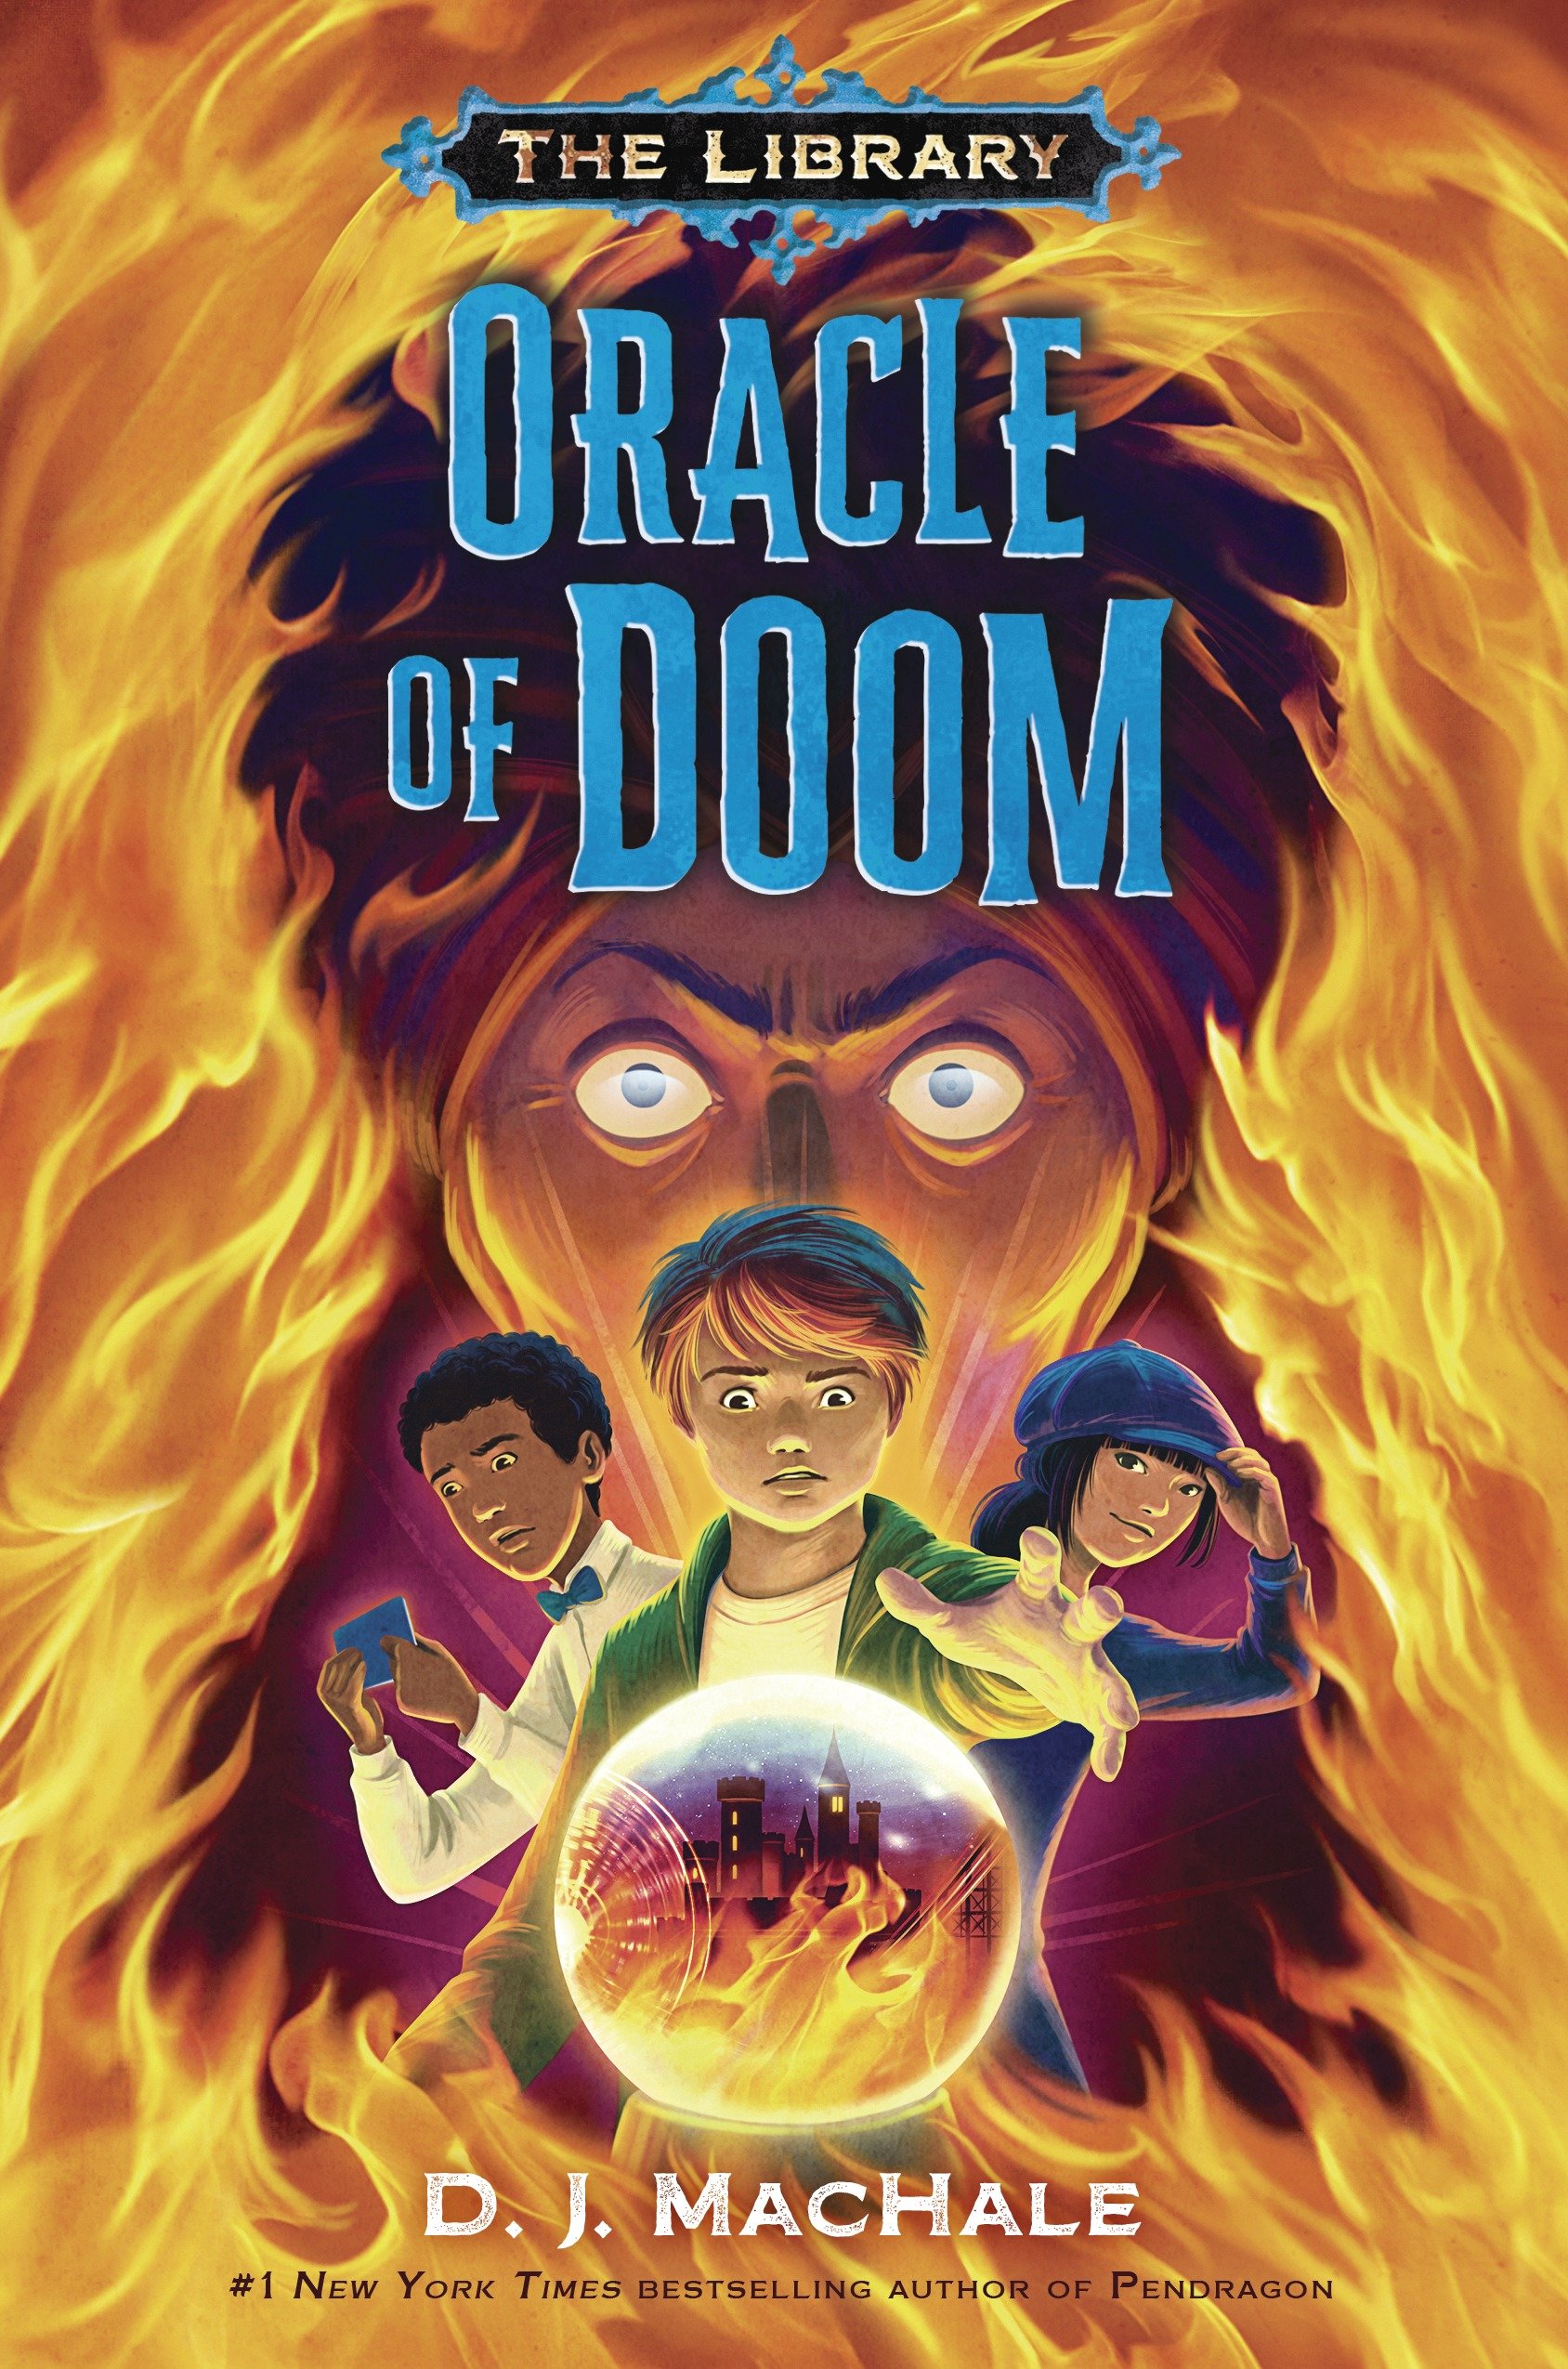 Oracle Of Doom (The Library Book 3) (Hardcover Book)